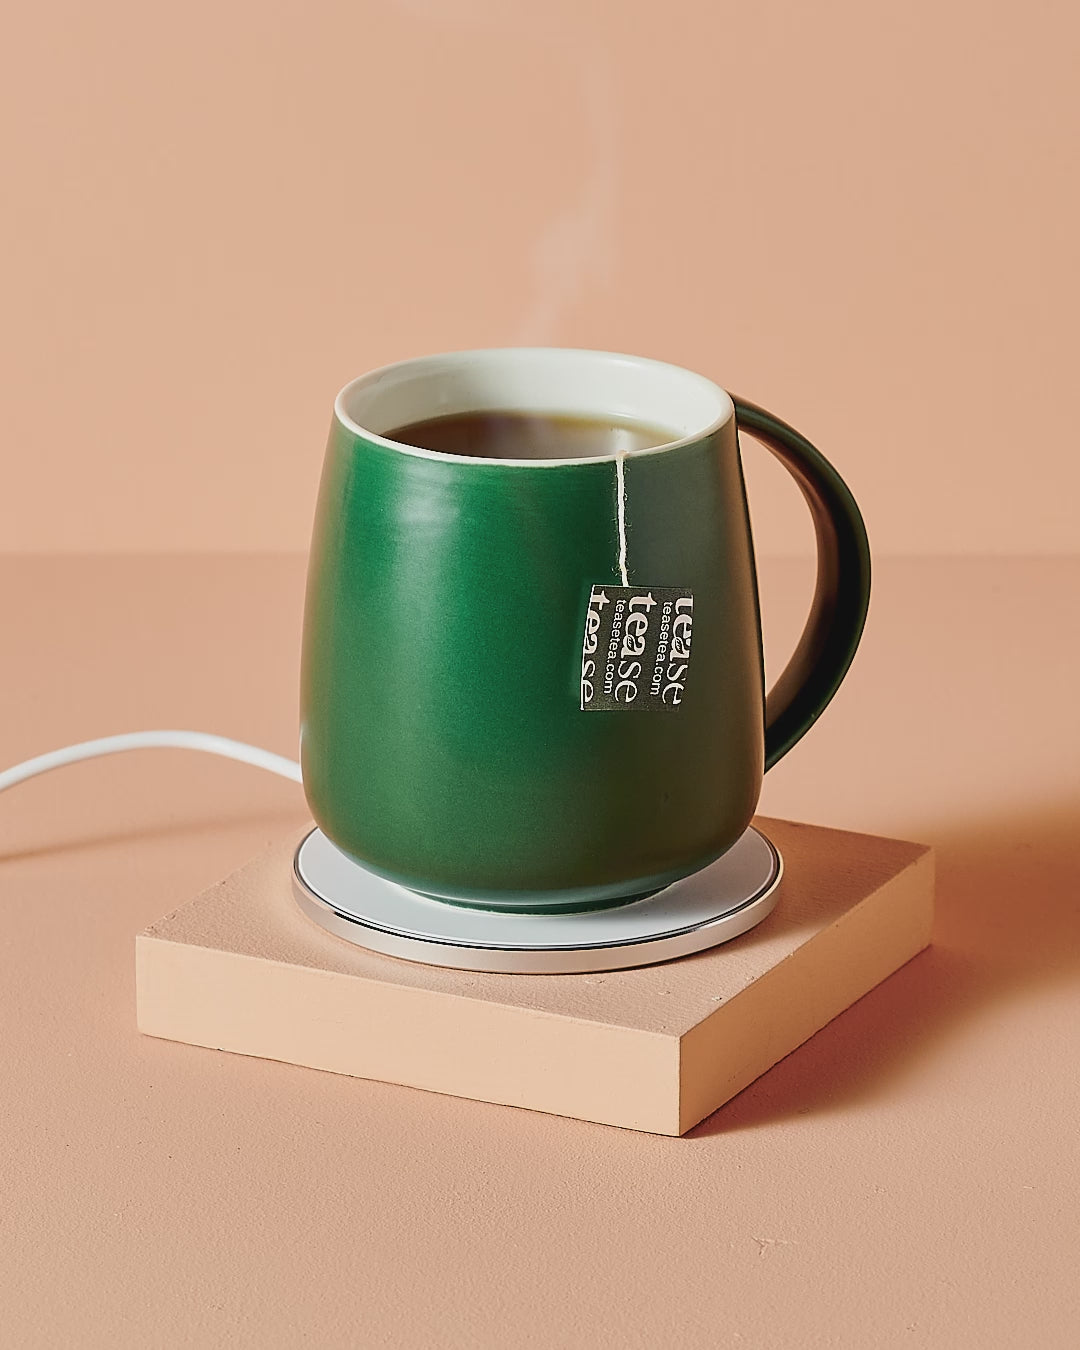 Buy Wholesale China Ceramic Coffee Cup Electric 55 Degree Usb